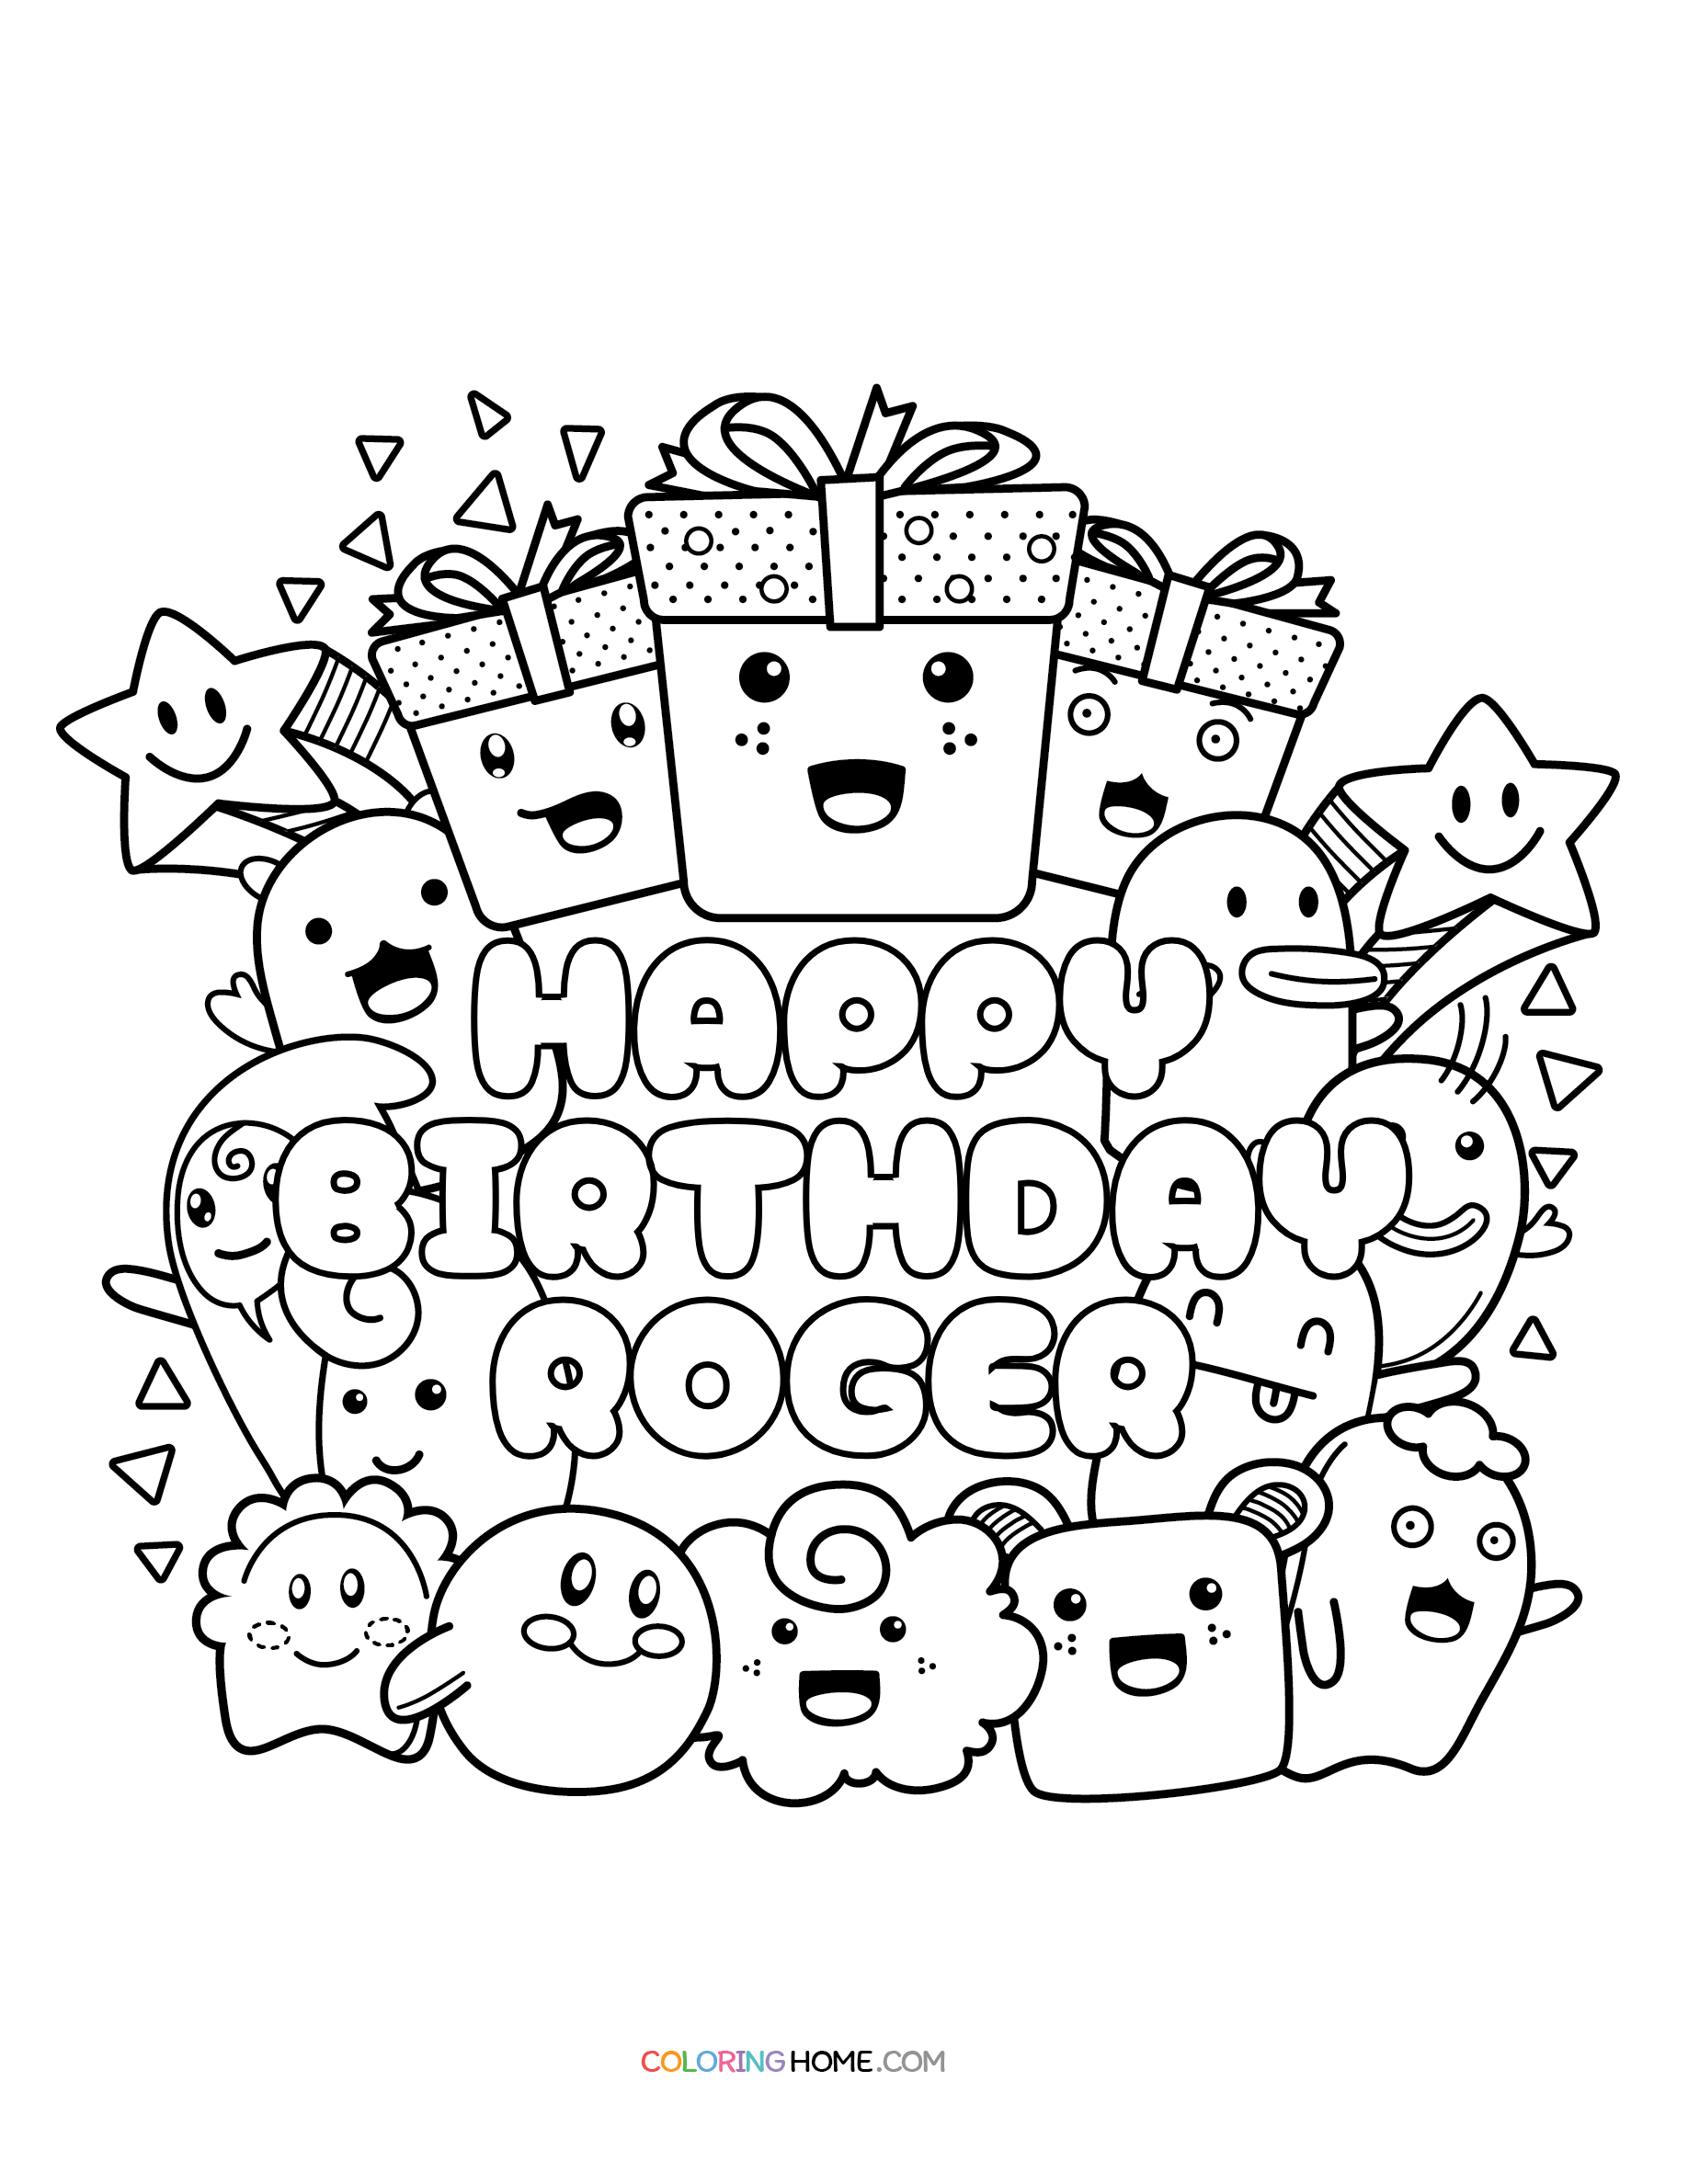 Happy Birthday Roger coloring page